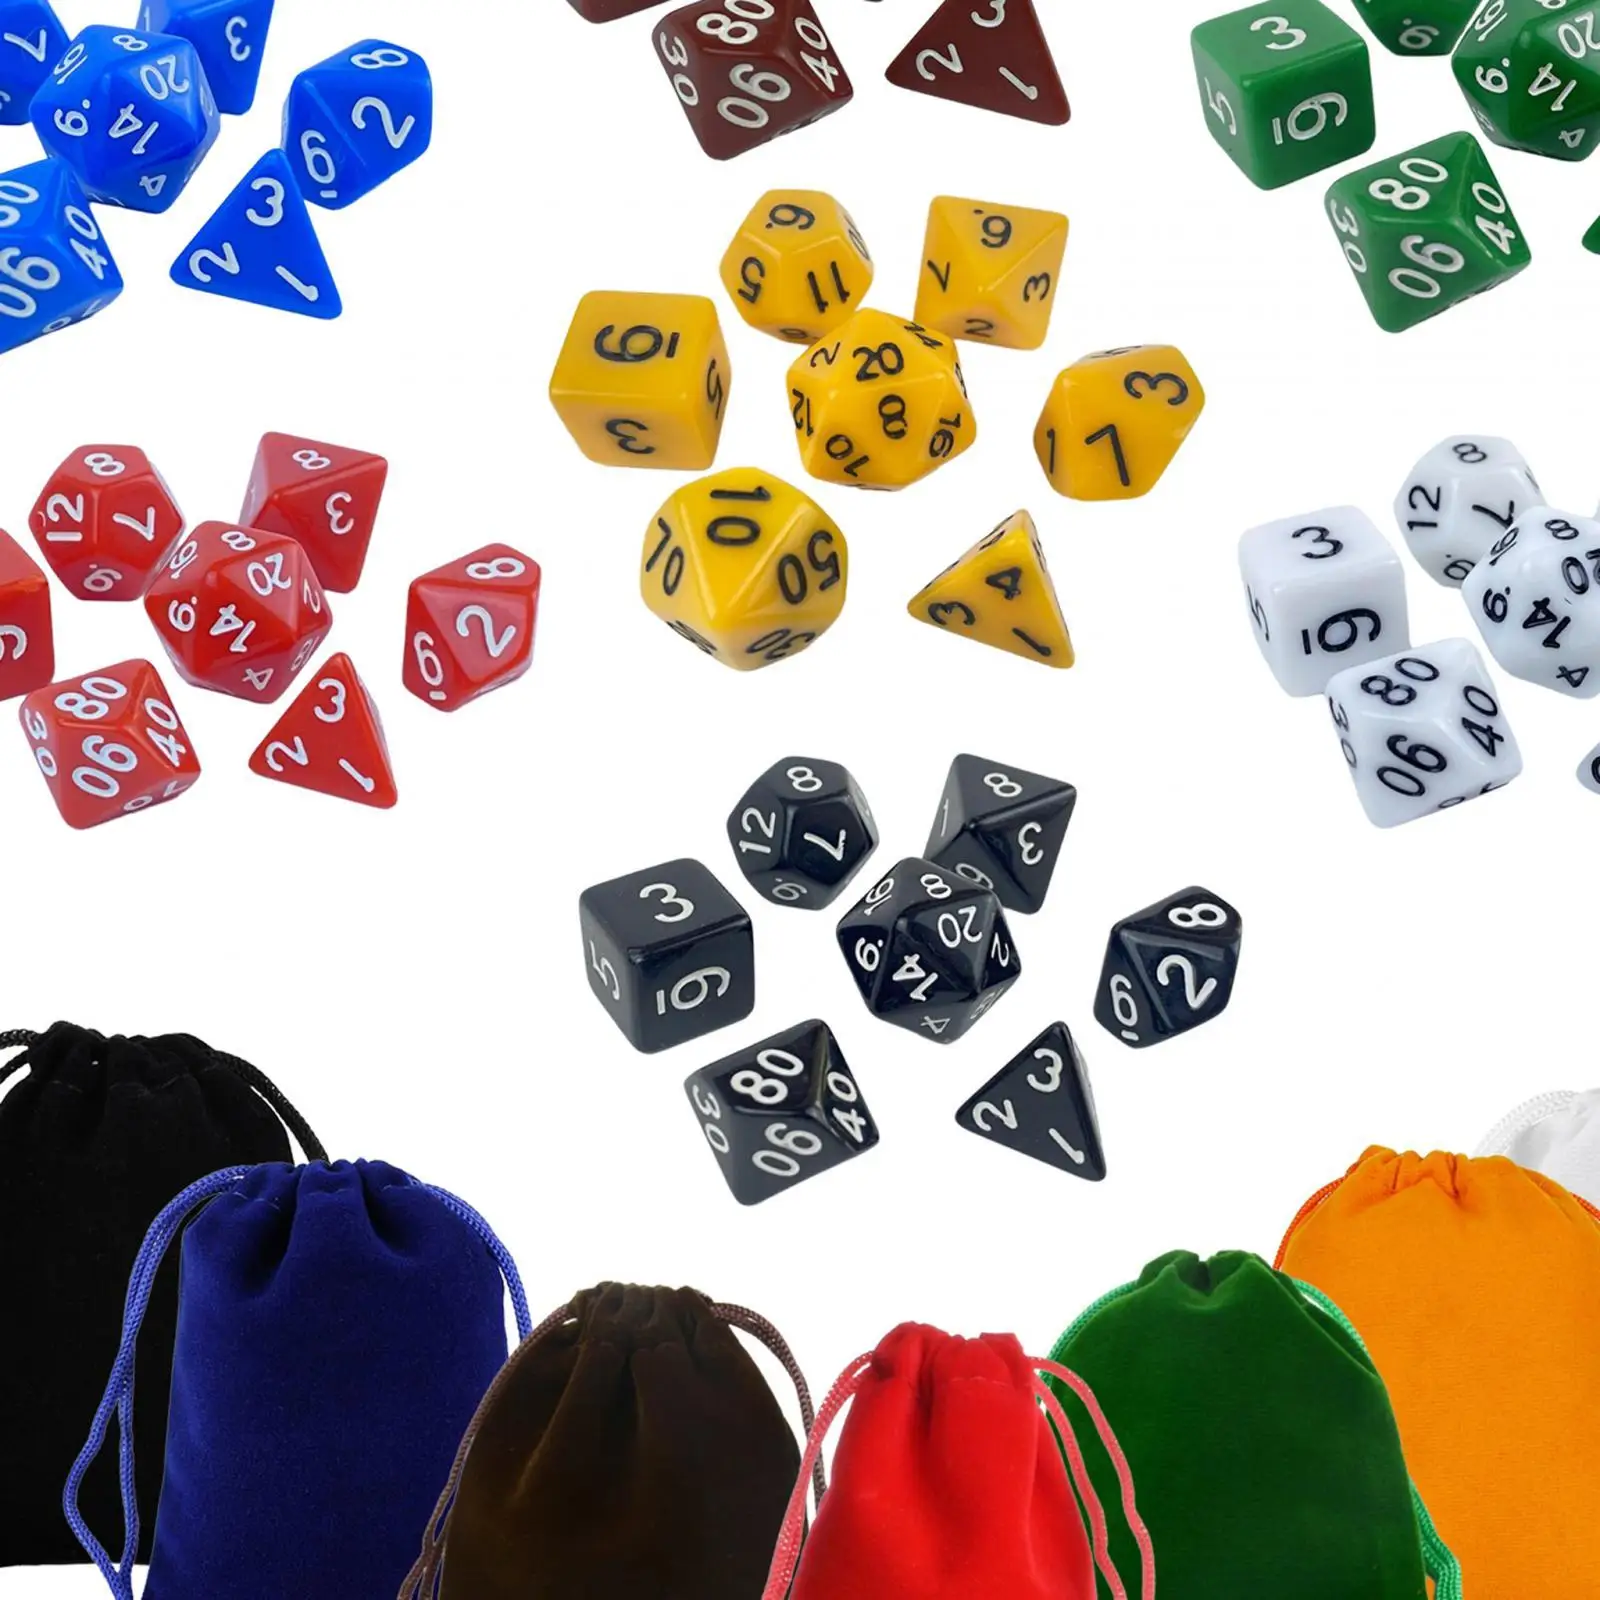 49x Dice Set Game Dices Set Polyhedral Dices with Storage Bag for KTV Board Game